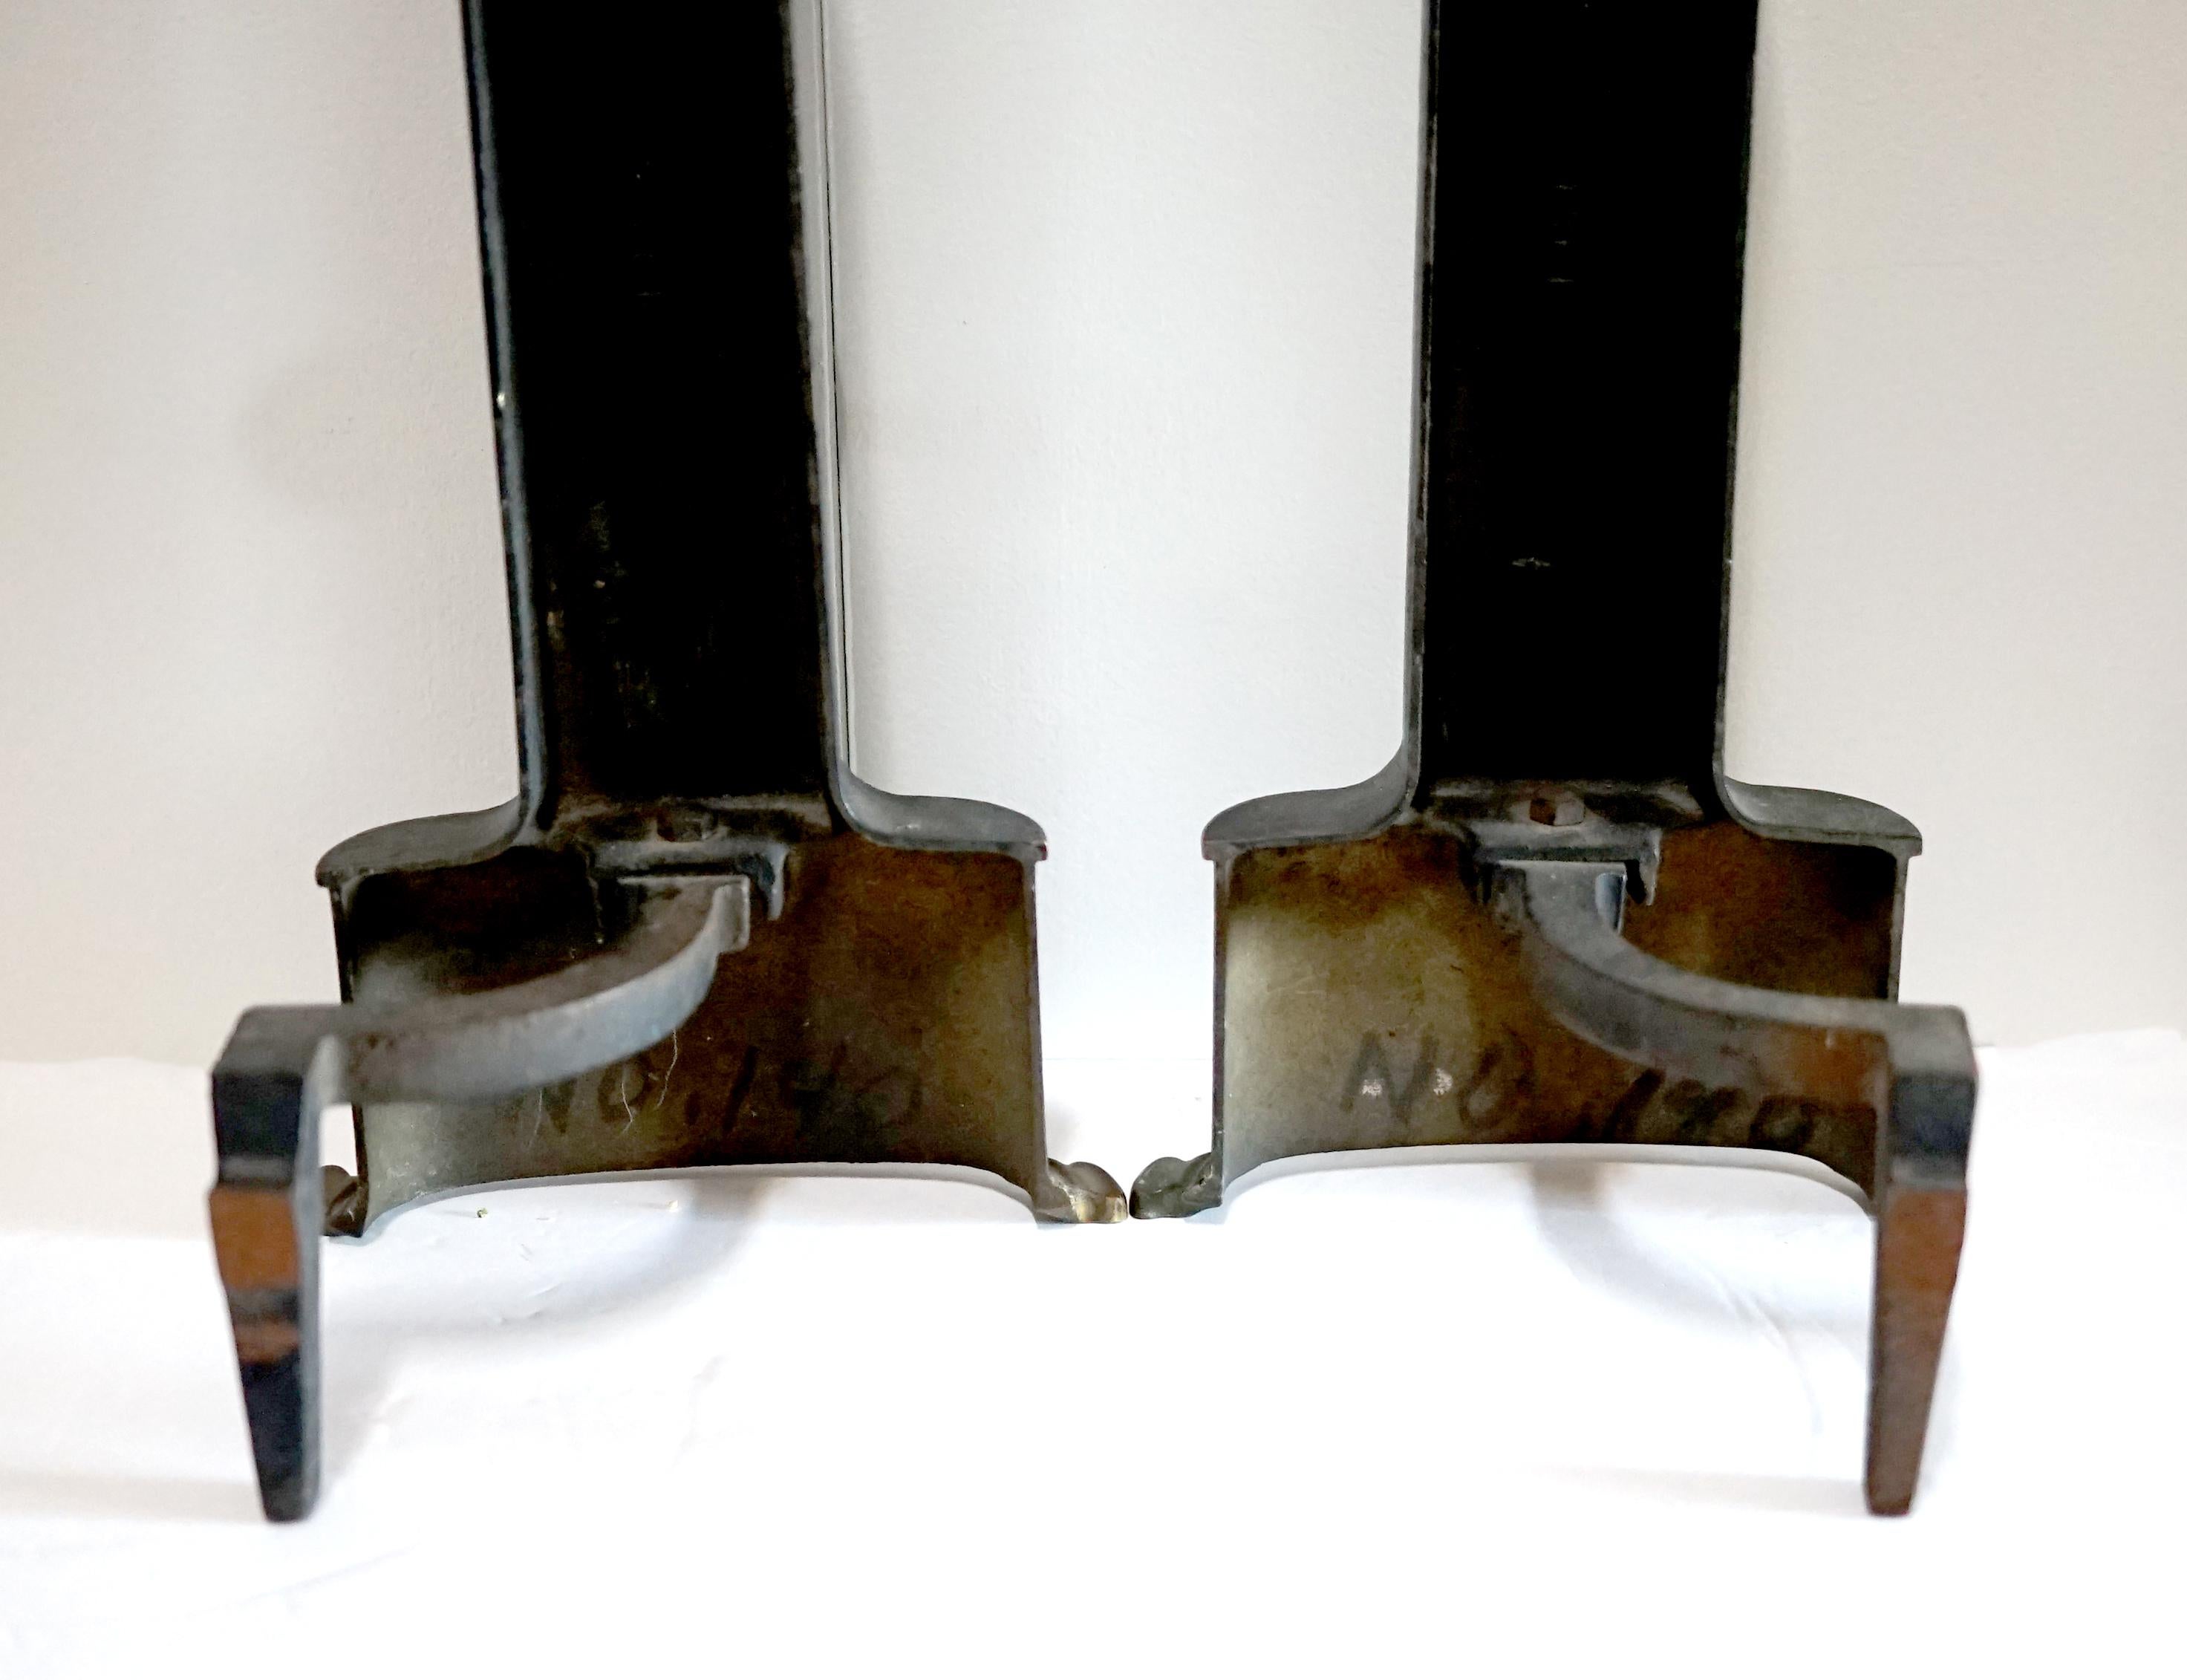 Pair of Neo Classical Style Iron, Ebonized Andirons with Urn Form Motif In Good Condition For Sale In Lomita, CA